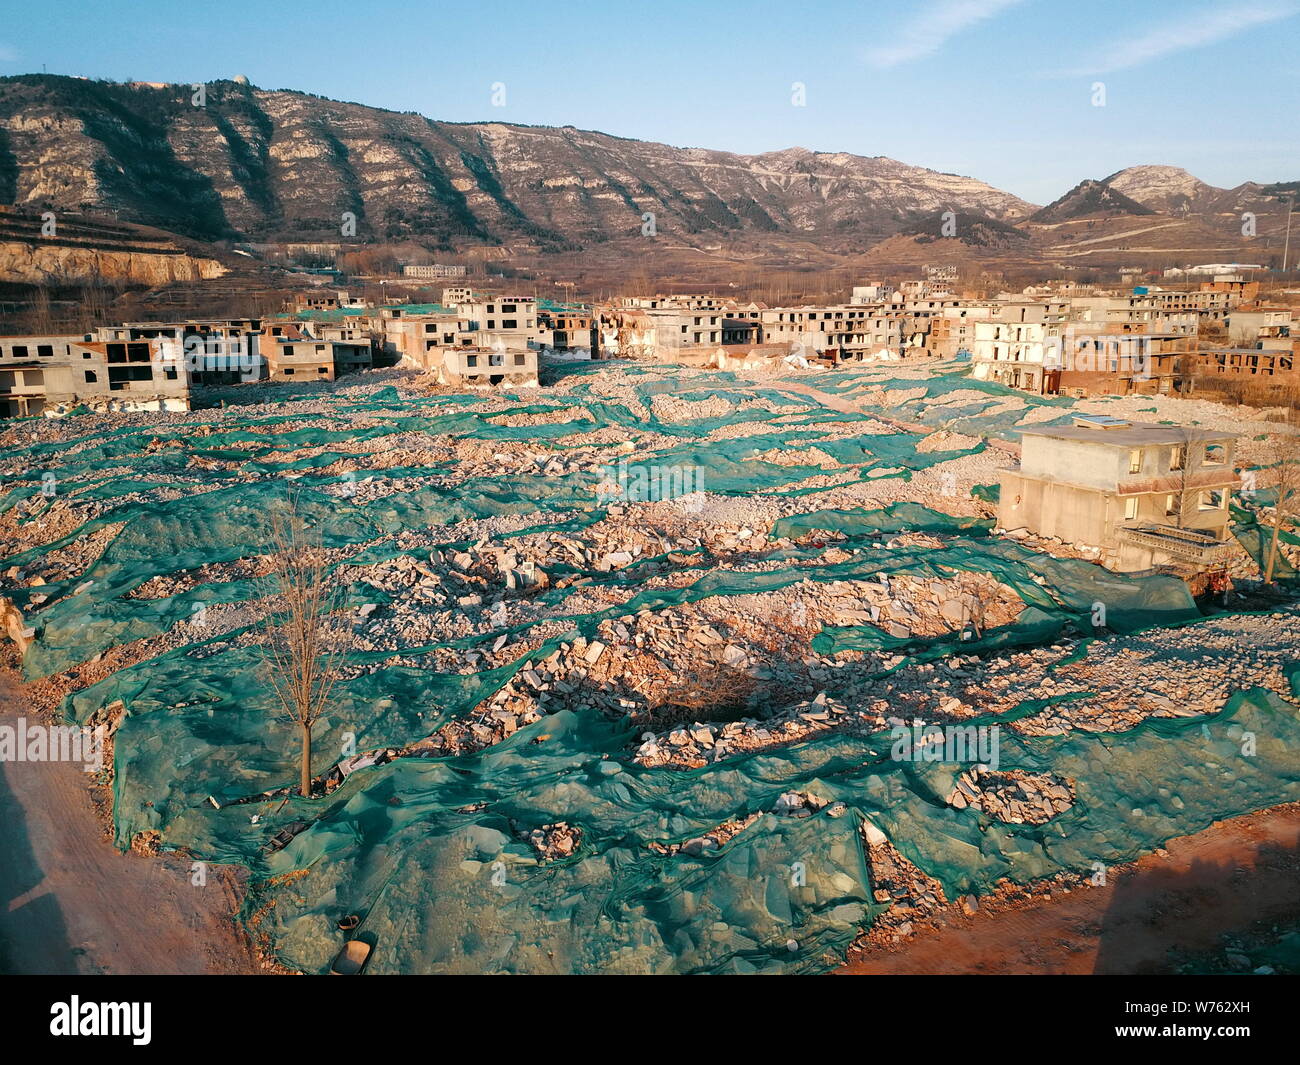 Aerial view of a 700-year-old village, Dajiangou village, almost razed to the ground due to renovation project of local government in Ji'nan city, eas Stock Photo